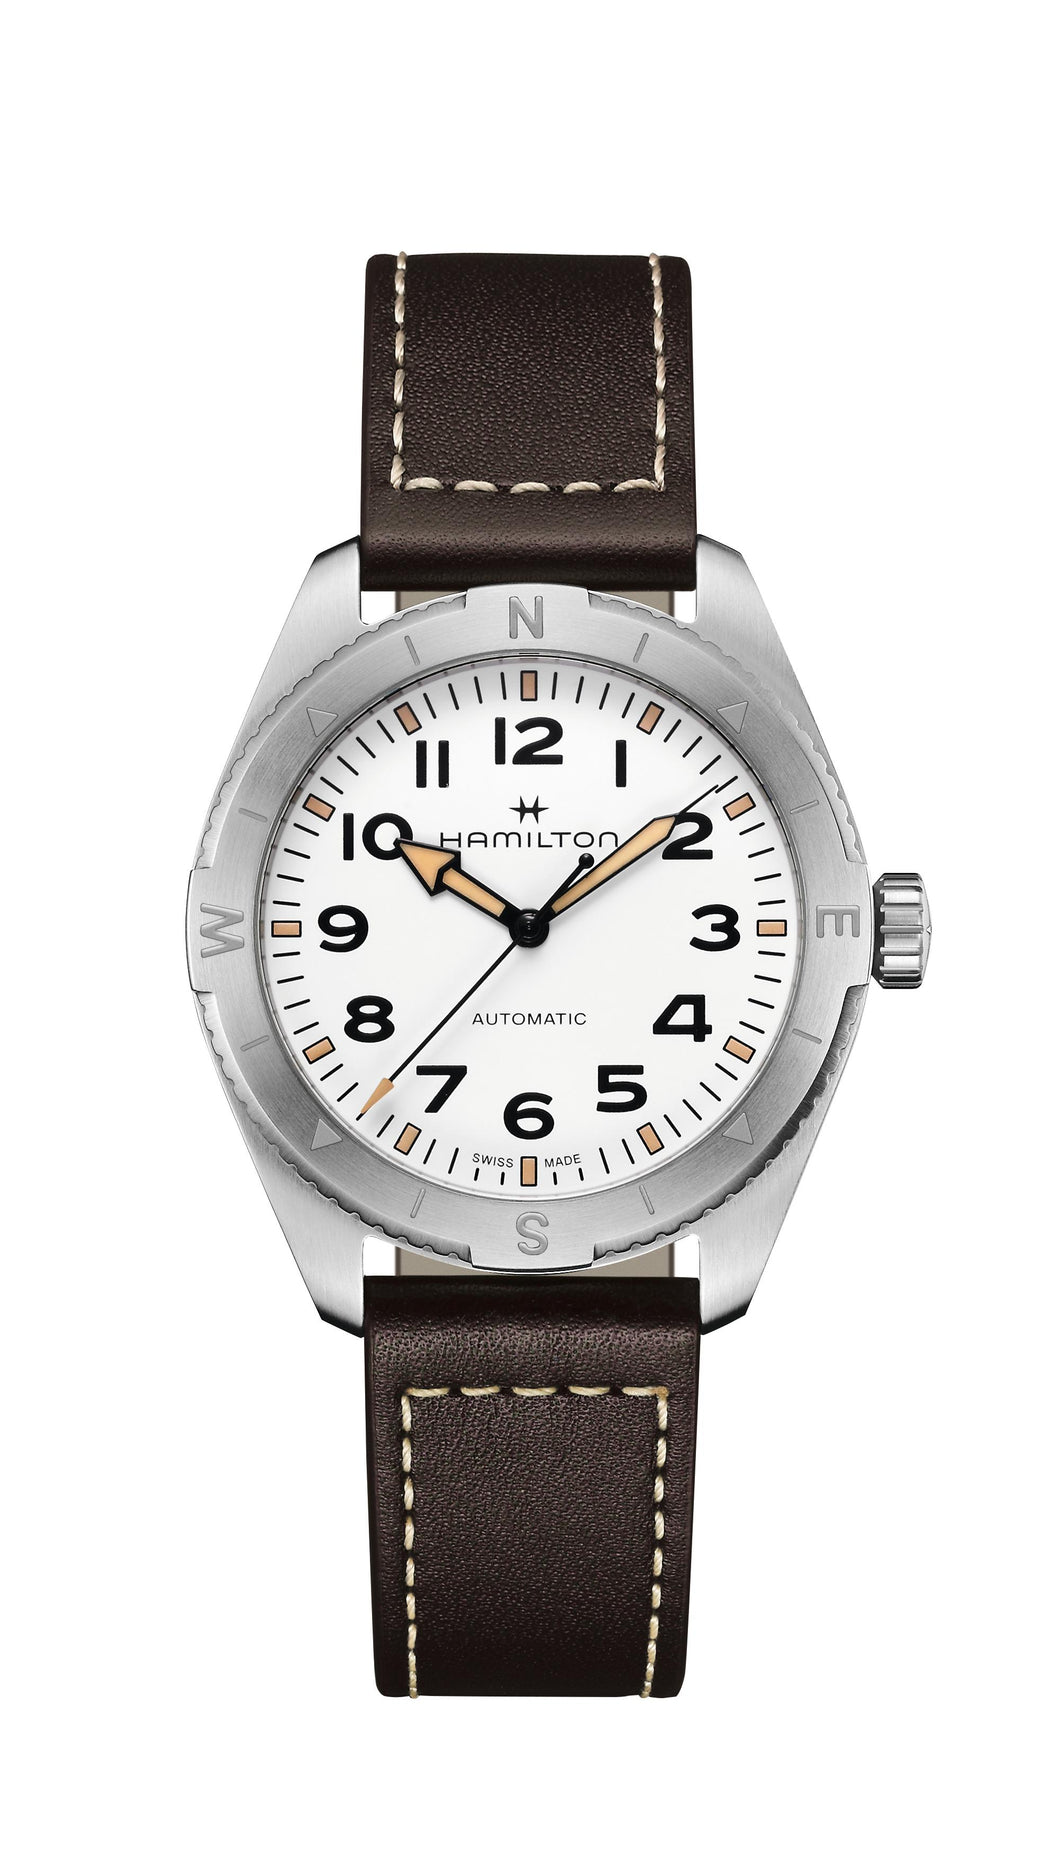 KHAKI FIELD EXPEDITION AUTO  37mm  H70225510